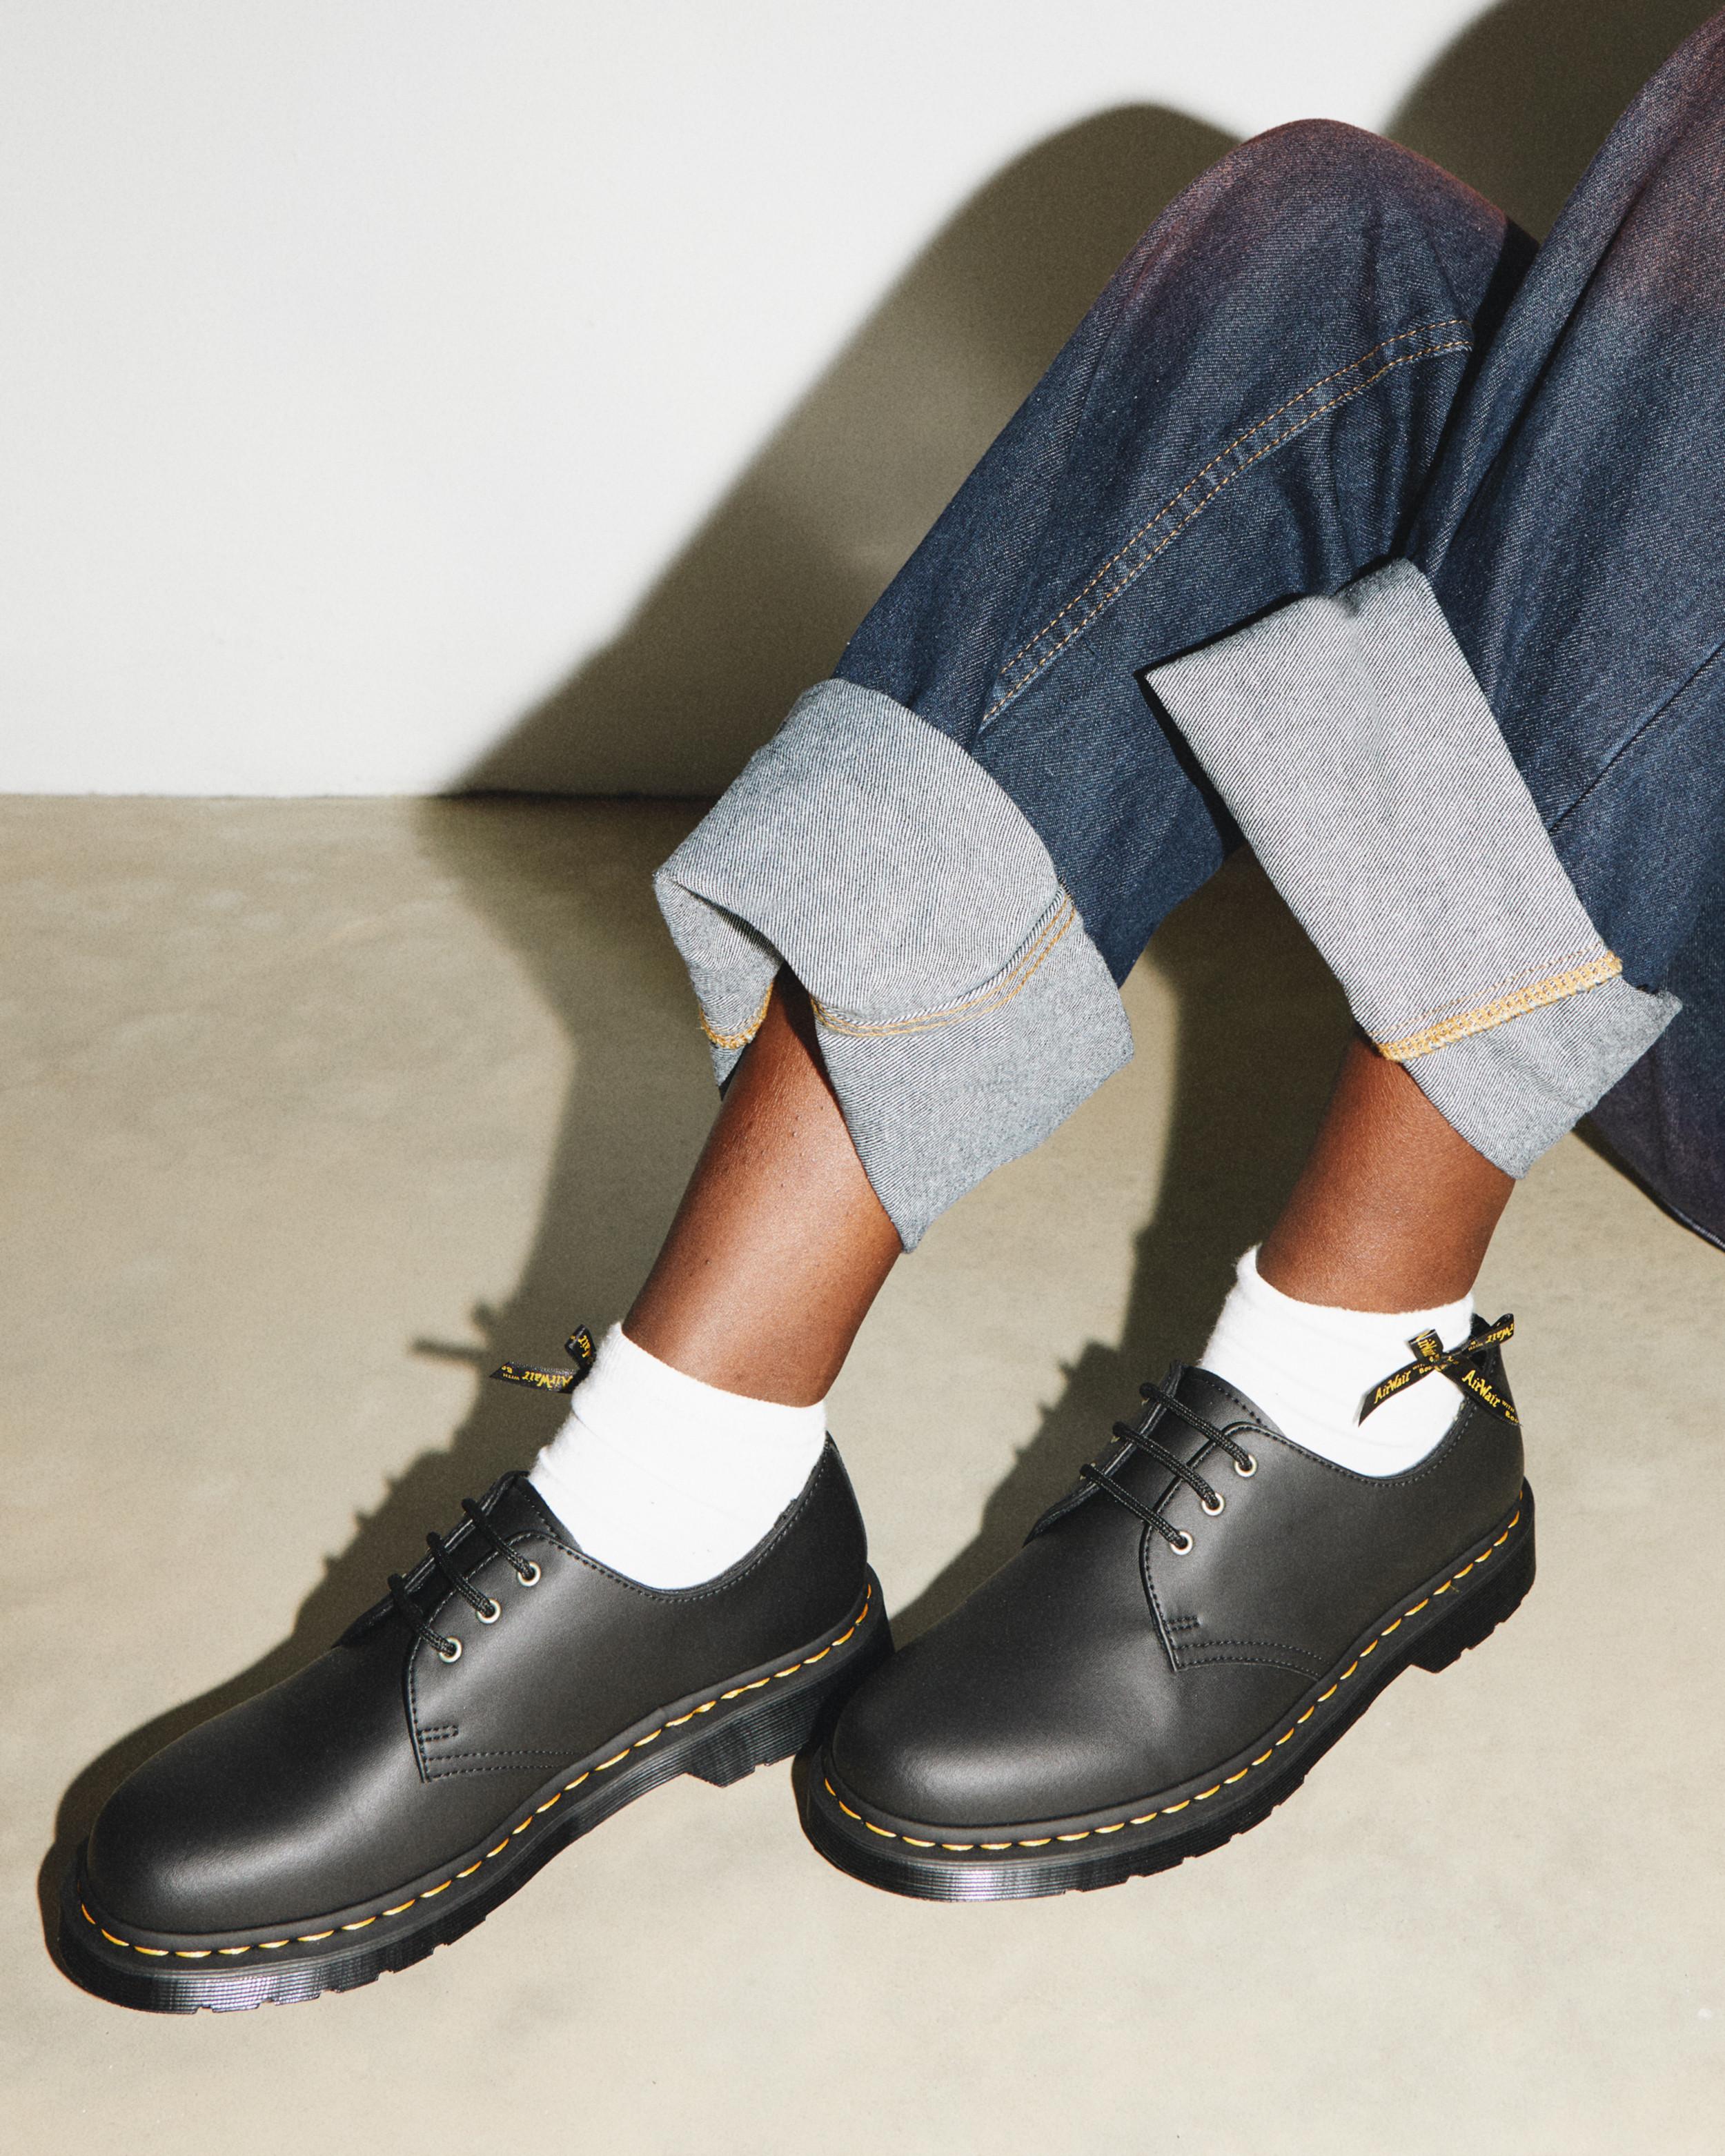 1461 Genix Nappa Reclaimed Leather Oxford Shoes in Black | Dr. Martens